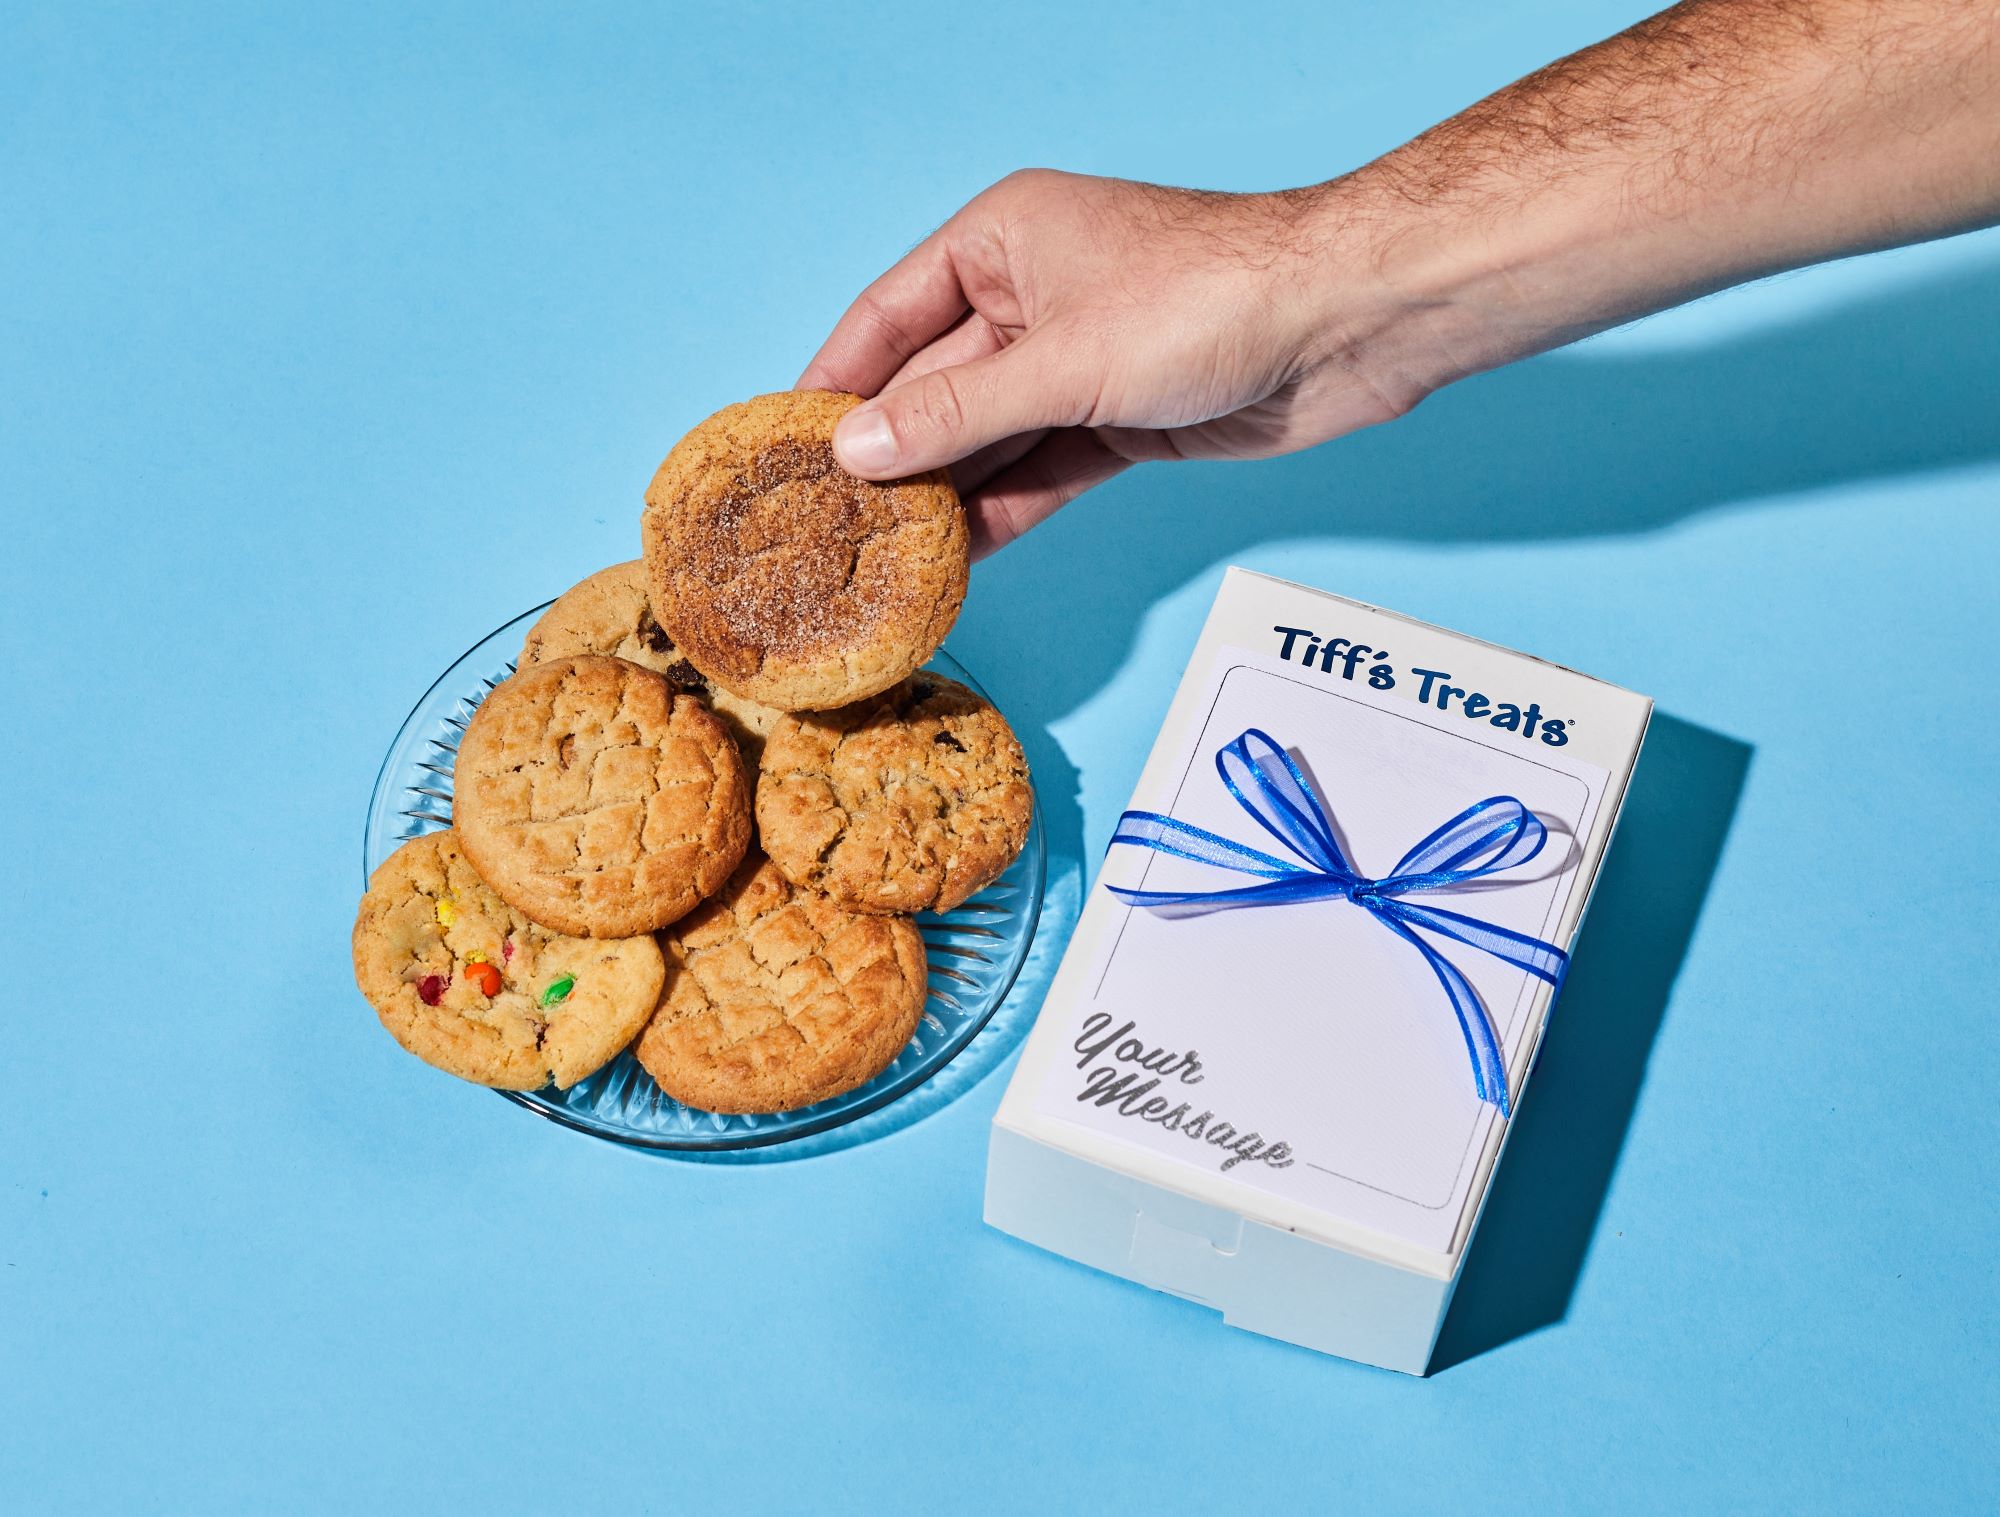 An image of the 6 types of Tiff's Treats cookies.